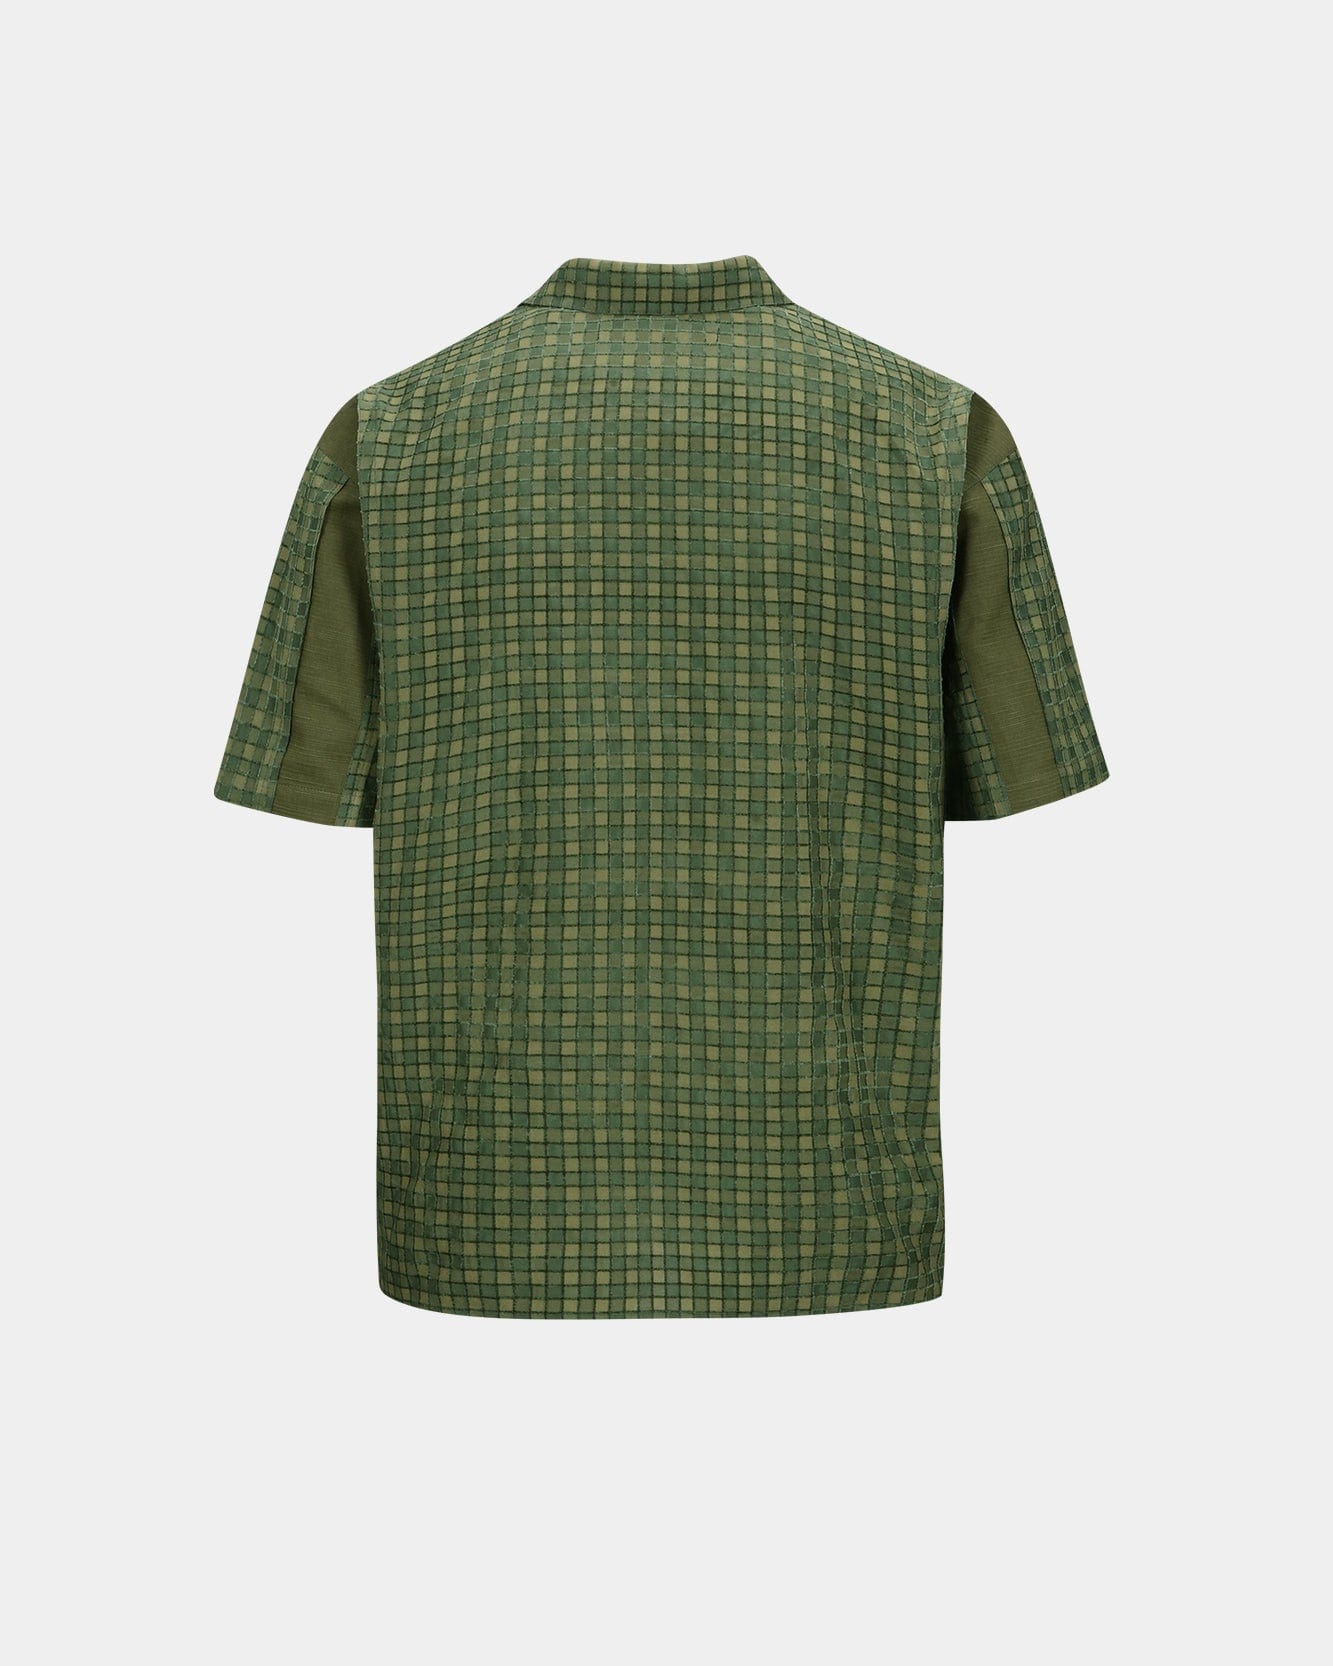 Andersson Bell APROL CHECK PANEL SHIRTS atb1058m(GREEN)